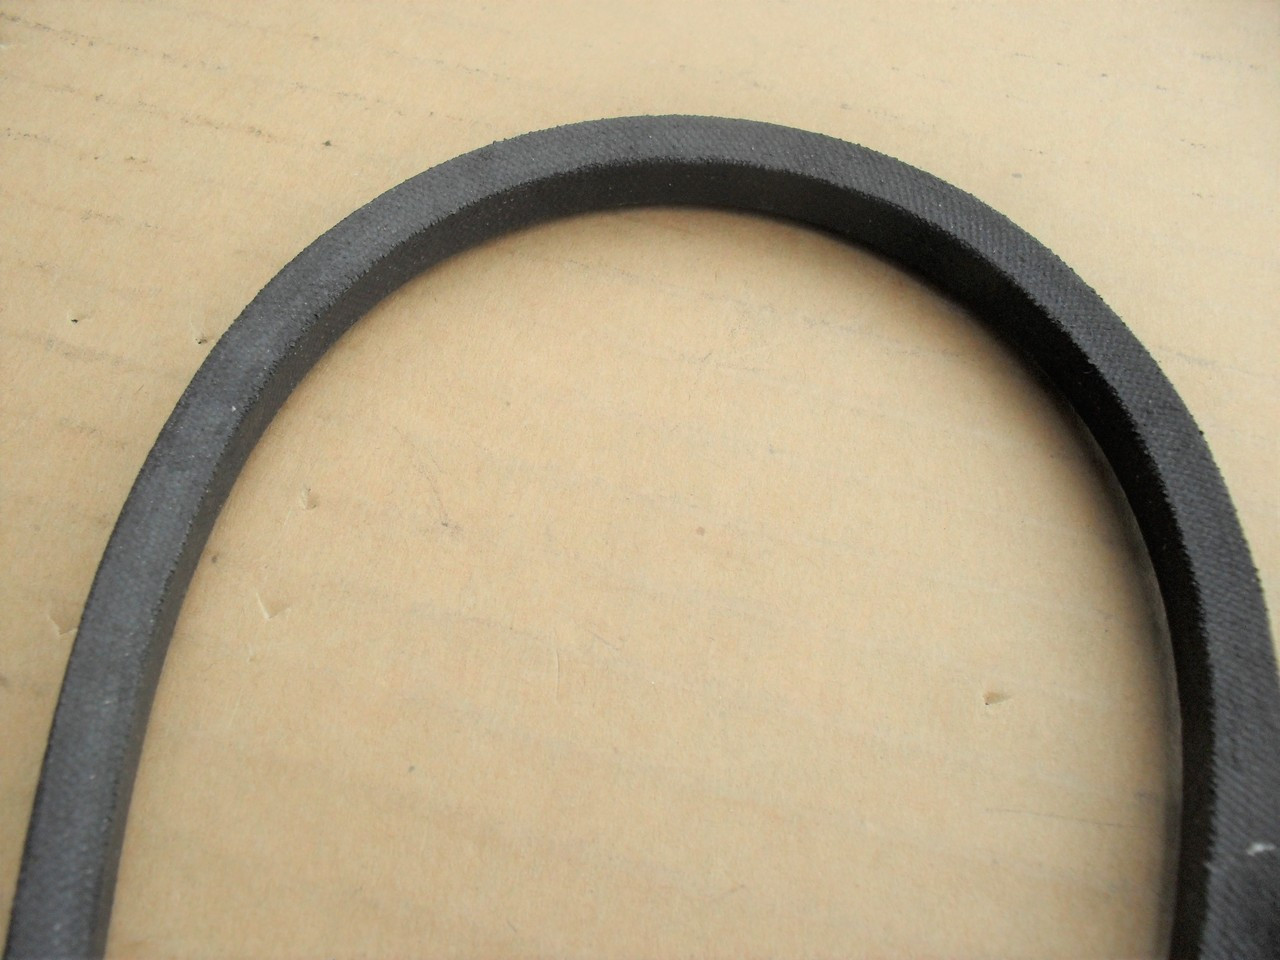 Drive Belt for Toro Recycler, Super Recycler 991597, 99-1597 Self Propelled